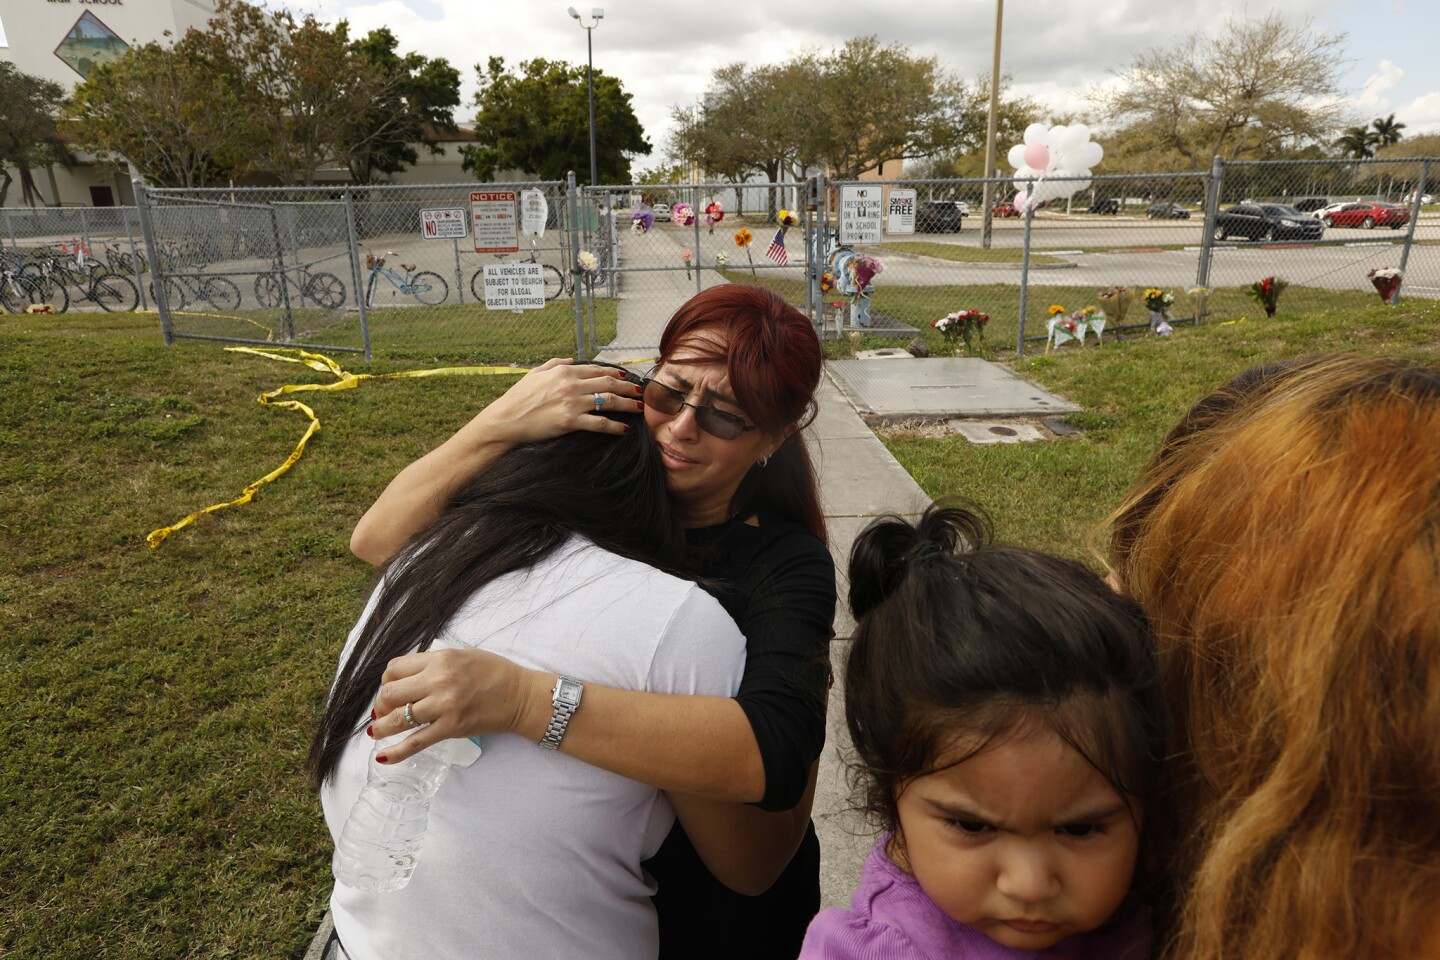 Abigail Avioa, a senior at Marjorie Stoneman Douglas High School, her back to camera, is prayed over in front of the school on Sunday, Feb. 18, 2018.